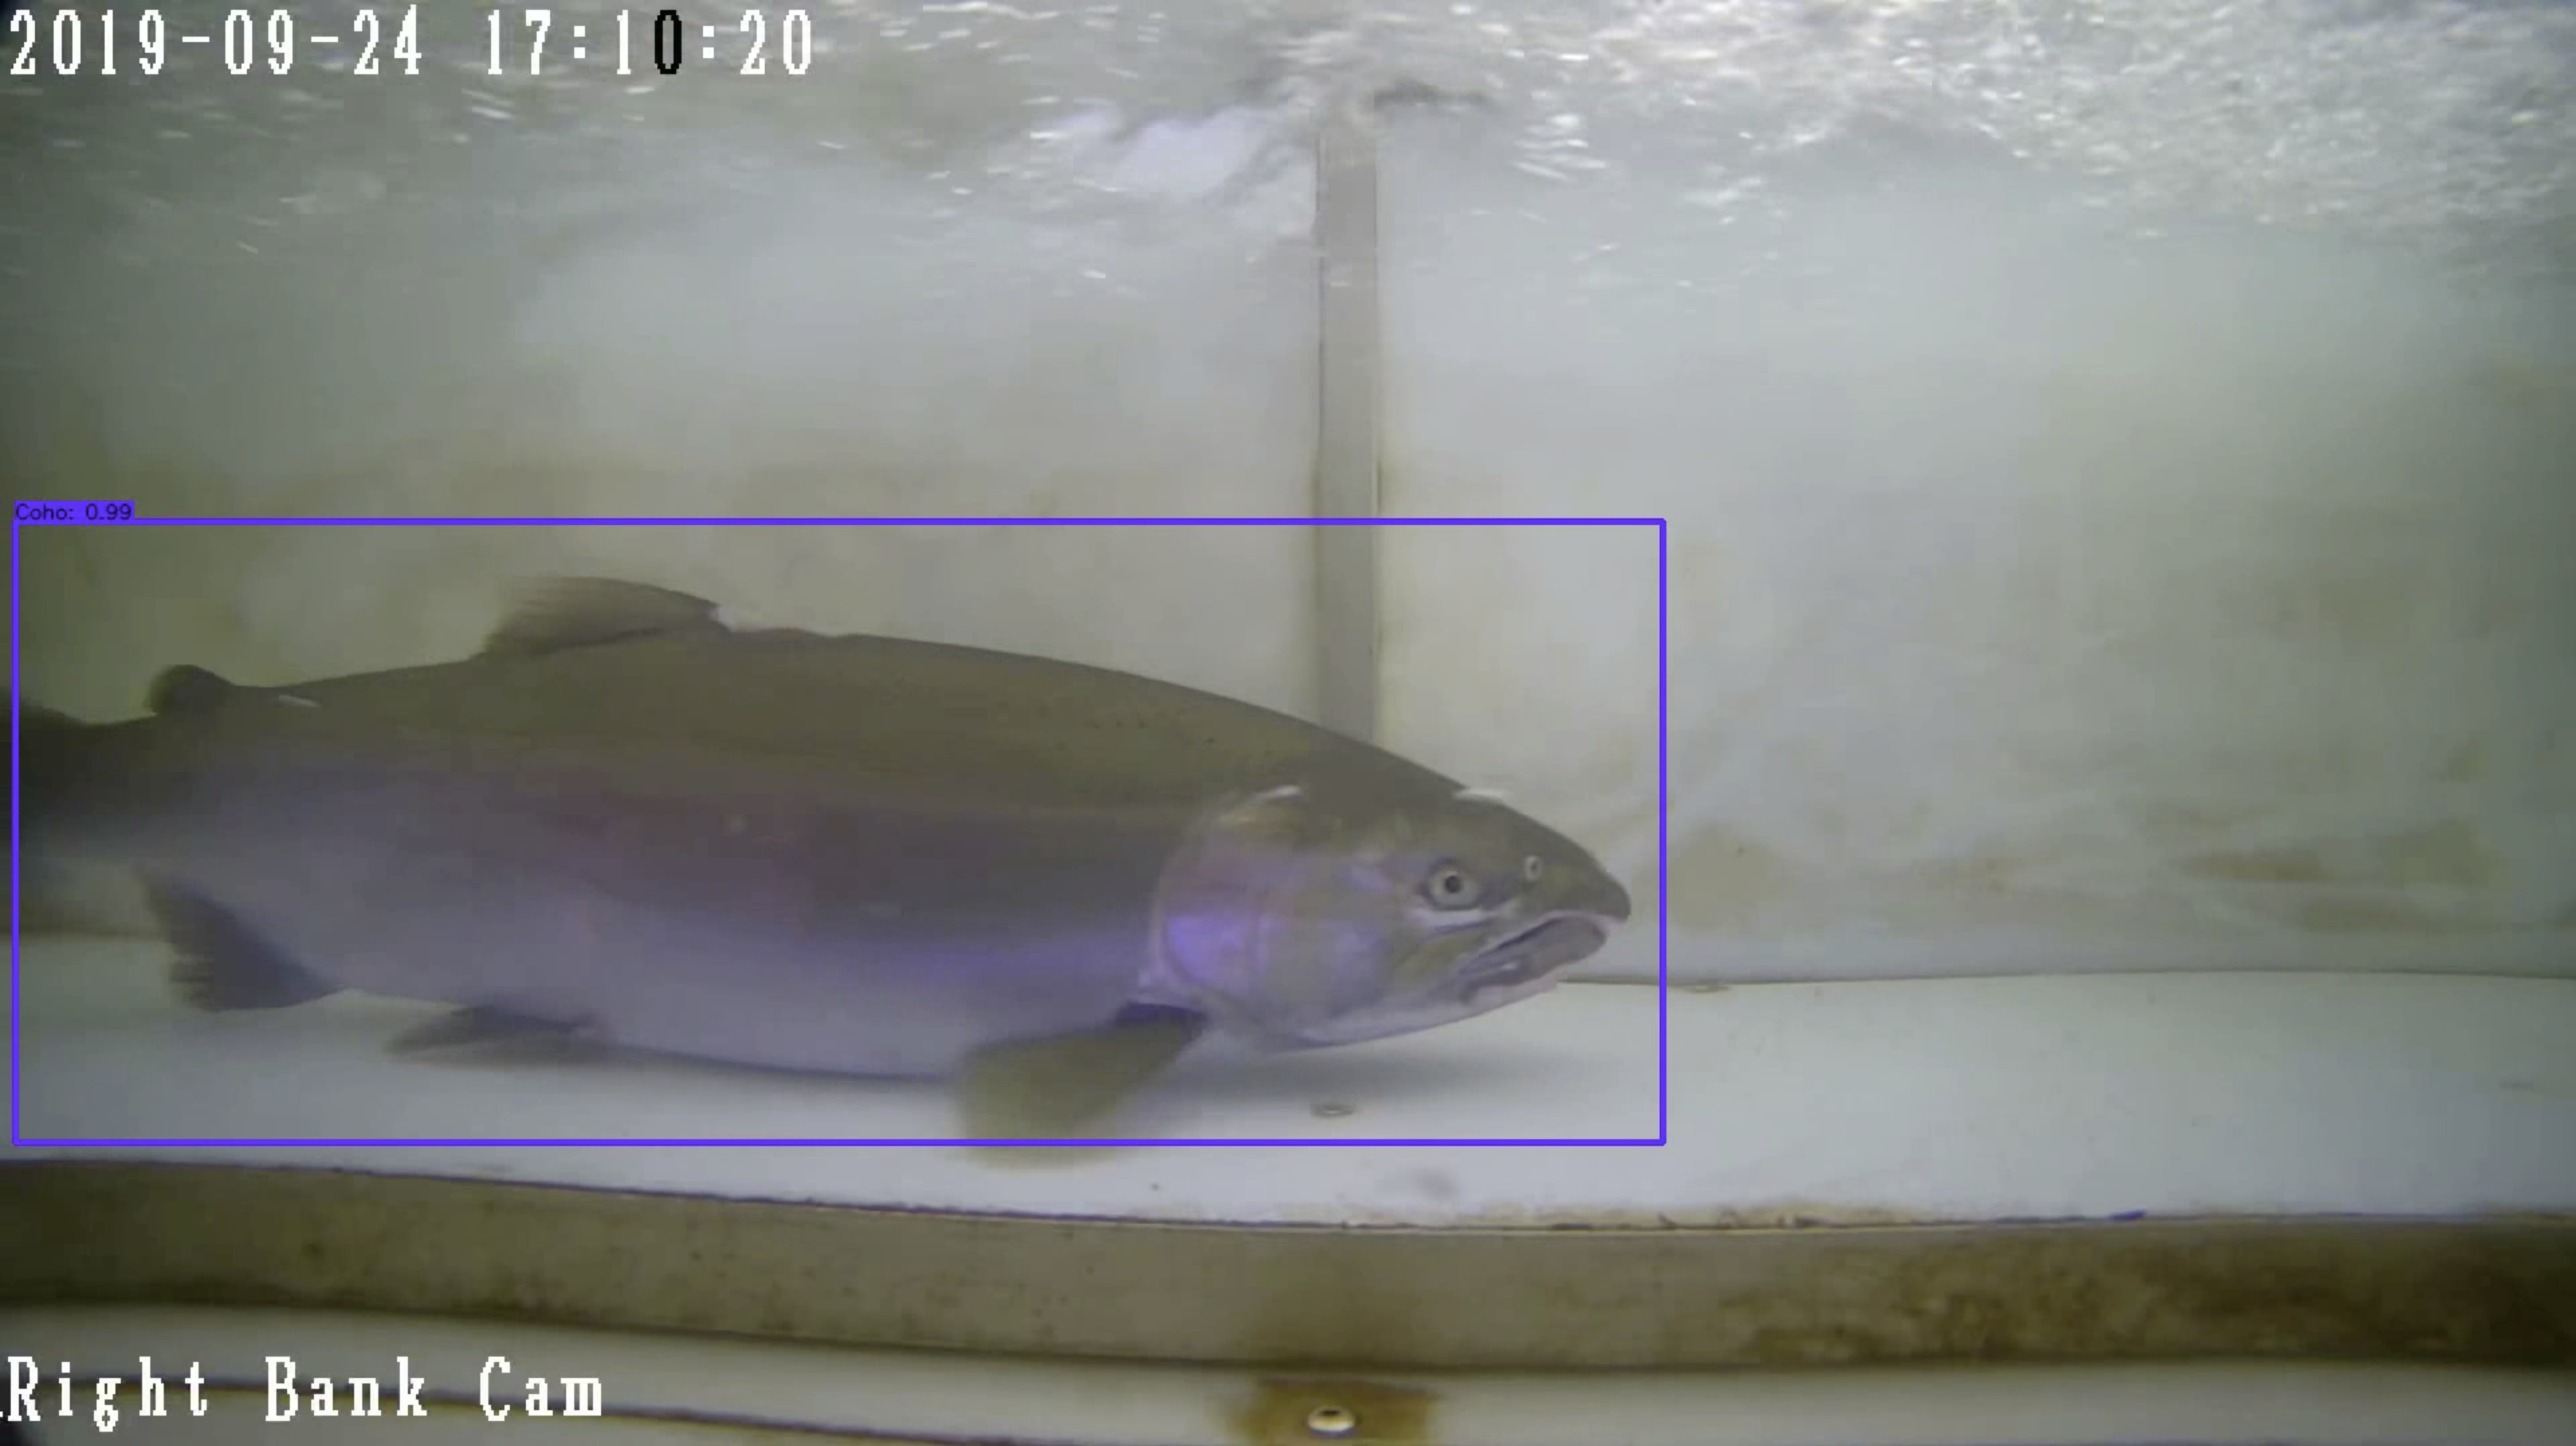 Still from the video system showing the computer system identifying and counting salmon species passing through the box (weir openings) during training and learning. Video courtesy of Will Atlas.